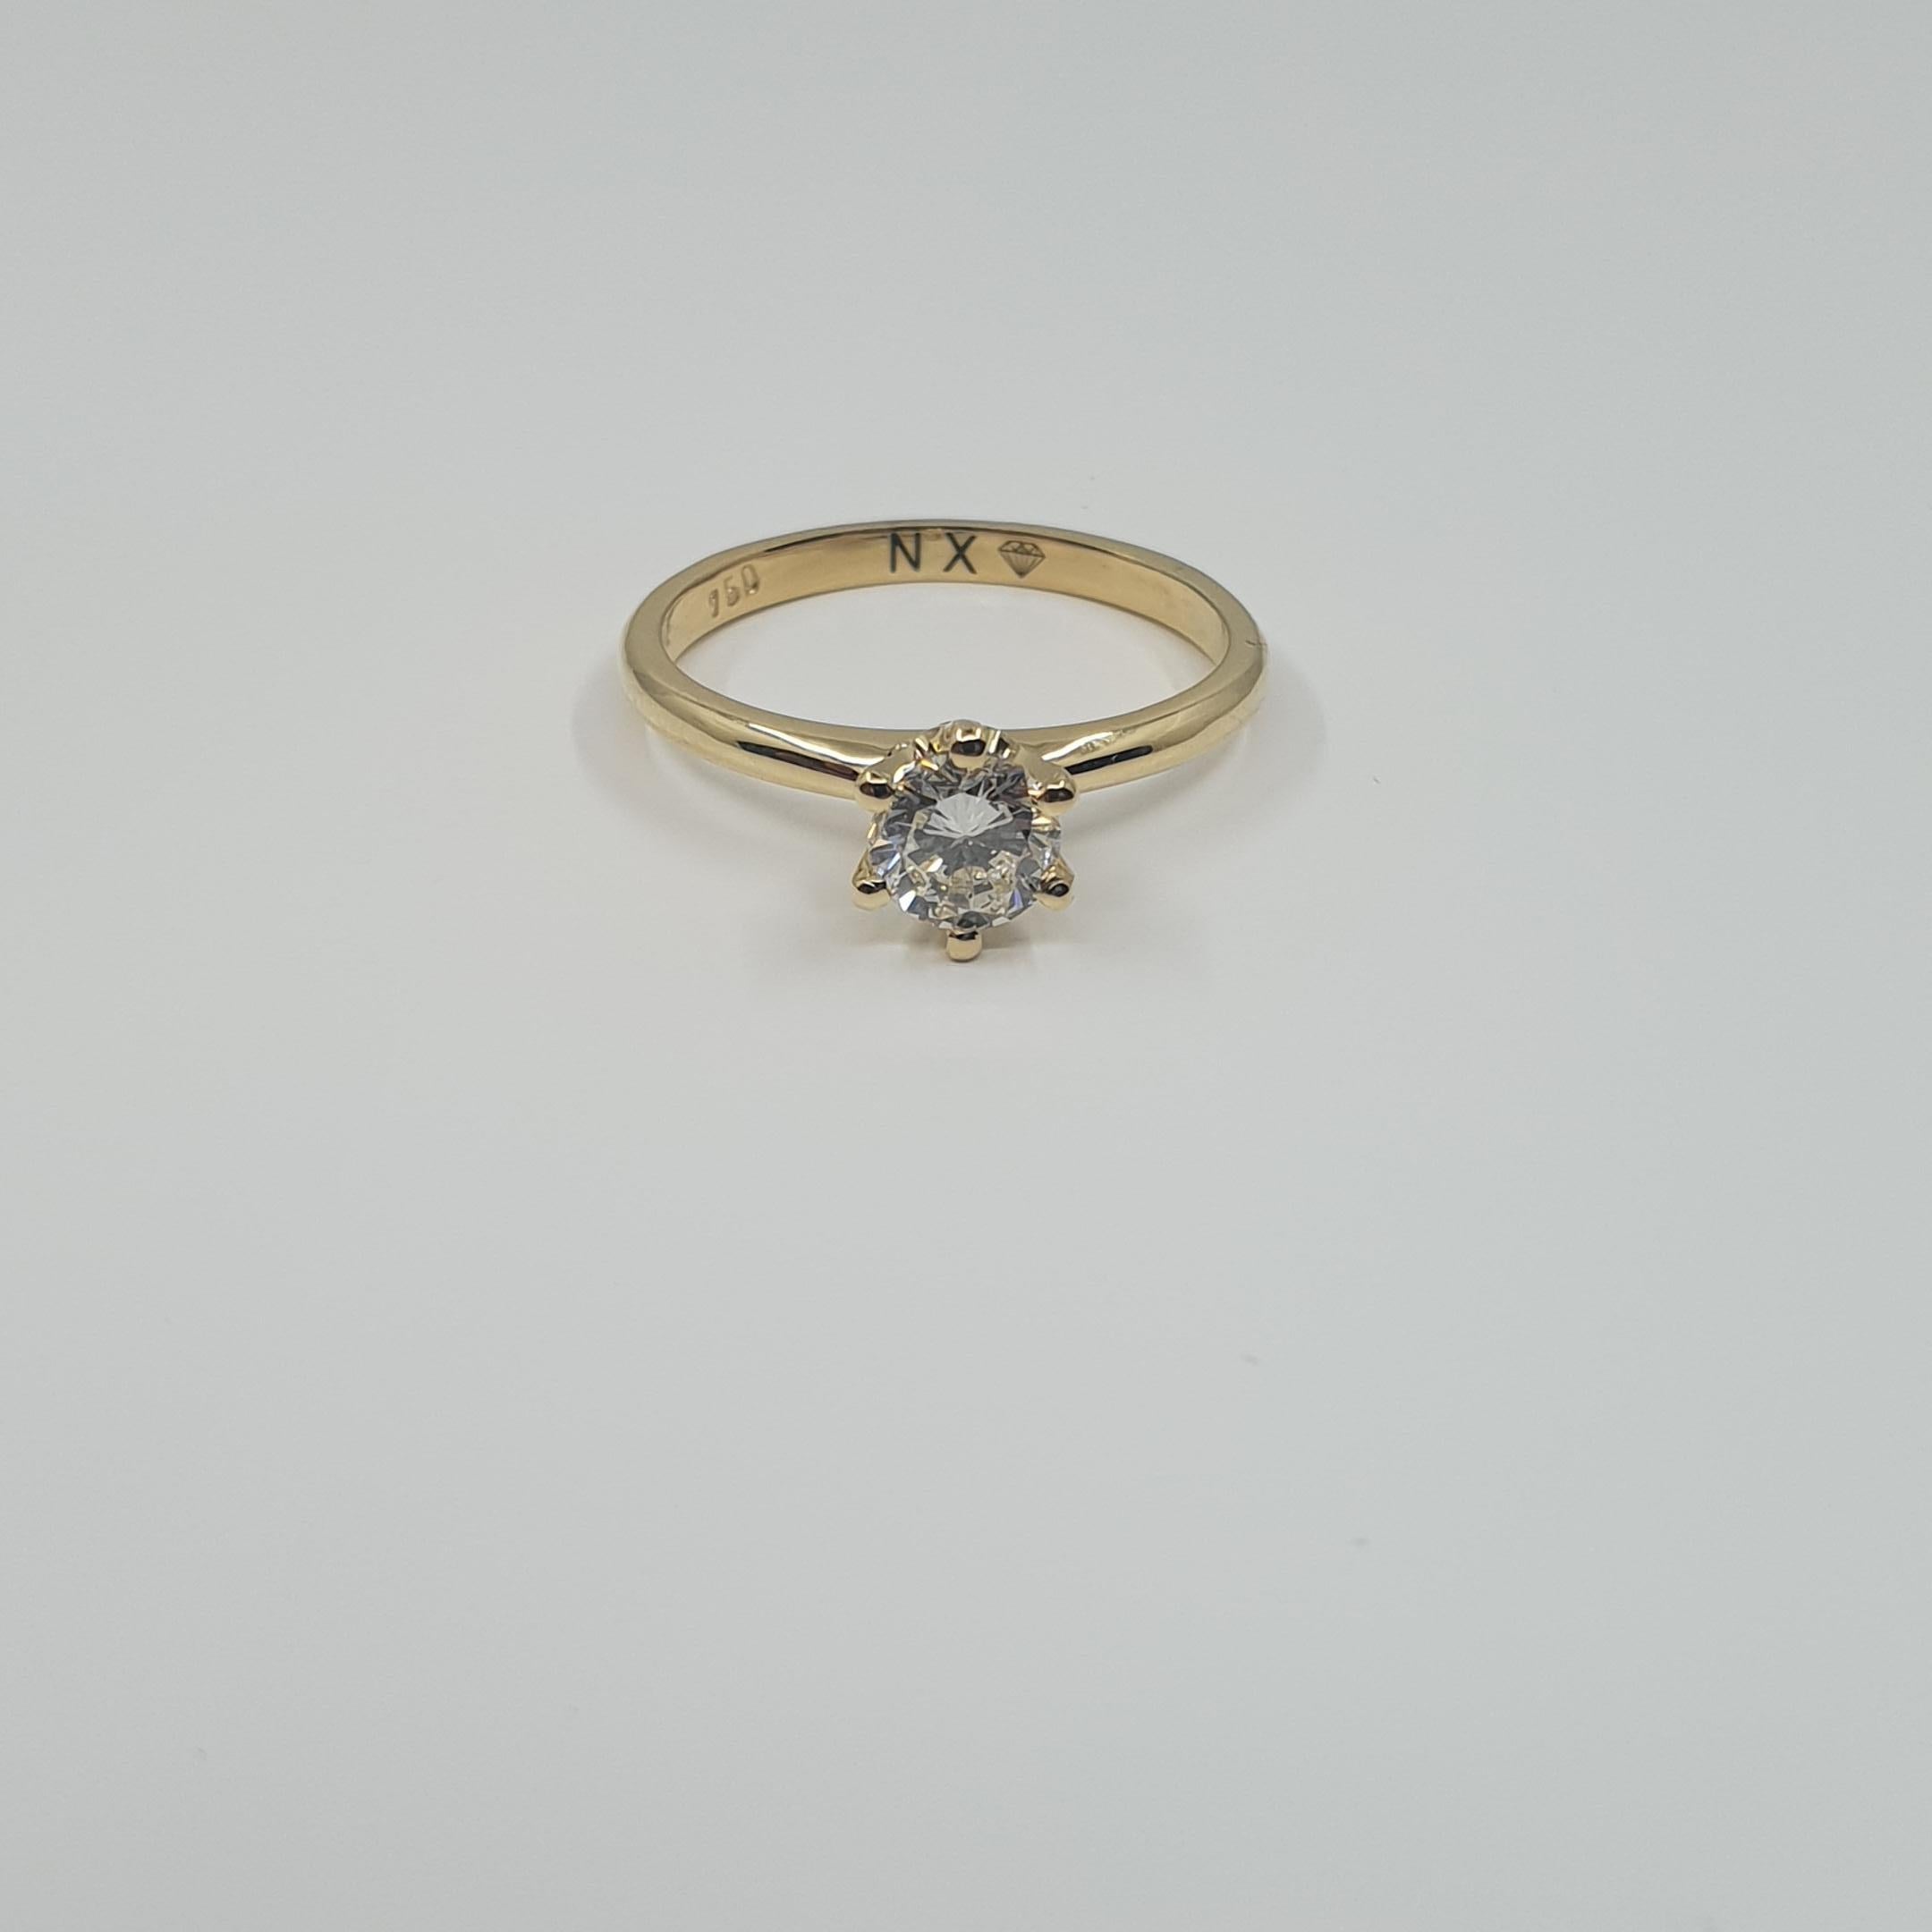 GIA Certified Diamond 0.50 H/SI1 Solitaire Ring 750 Gold in 6 Prong Setting

High Gloss Finish, Fine Solitaire Ring in 18k Gold. Any Ring Size possible. 

5 C`s:
Certificate: GIA
Carat: 0,50ct
Color: H
Clarity: SI1(Small Inclusions)
Cut: Very